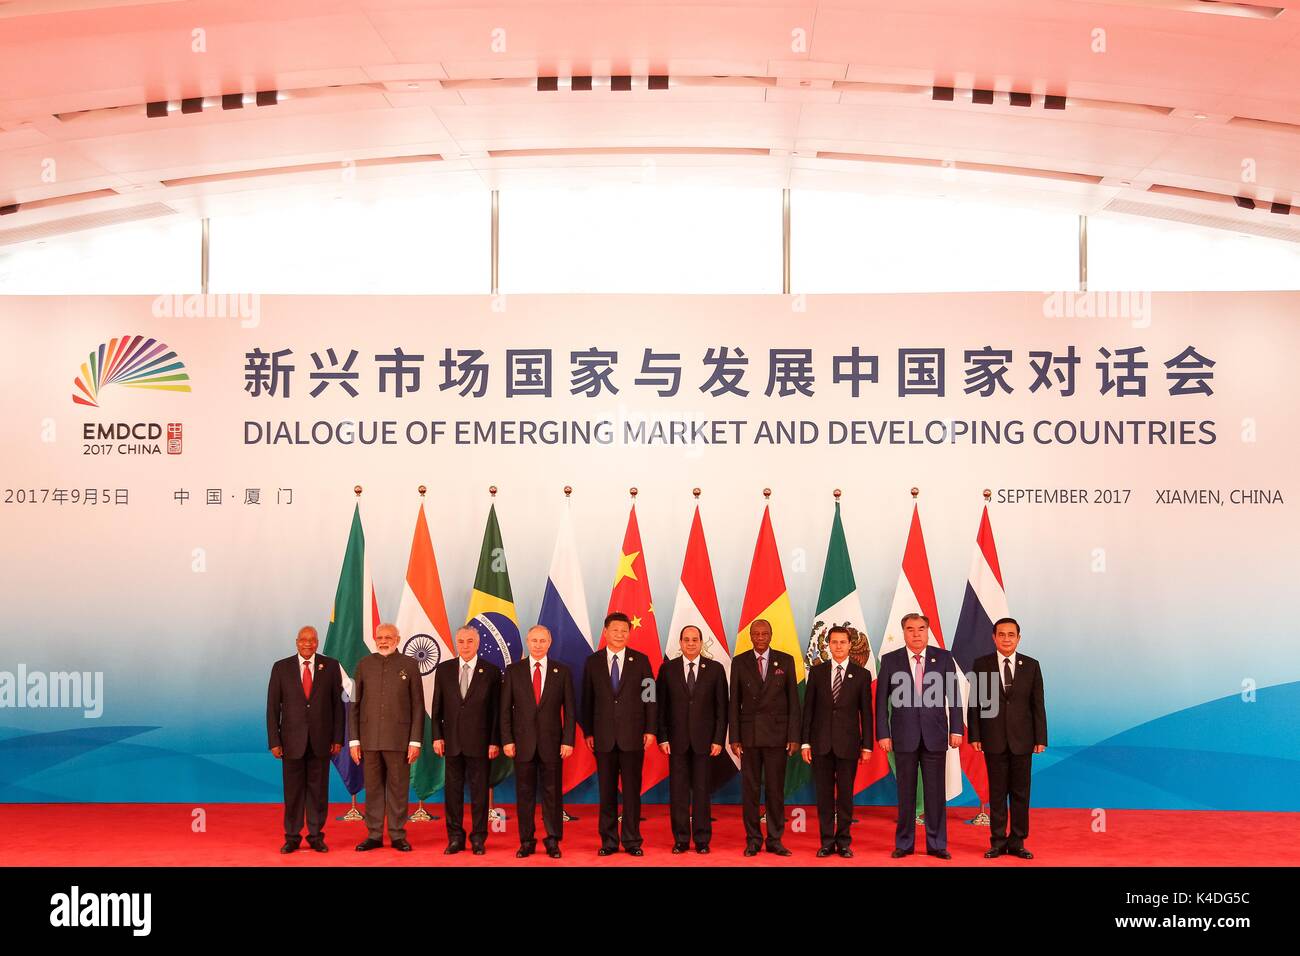 Leaders attending the BRICS Summit meeting on the Dialogue of Emerging Market and Developing Countries stand together for a family photo September 5, 2017 in Xiamen, China. Left to right are: South African President Jacob Zuma, Indian Prime Minister Narendra Modi, Brazilian President Michel Temer, Russian President Vladimir Putin, Chinese President Xi Jinping, Egyptian President Abdel-Fattah el-Sissi, Guinean President Alpha Conde, Mexican President Enrique Pena Nieto, Tajik President Emomali Rahmon and Thai Prime Minister Prayuth Chan-ocha. Stock Photo